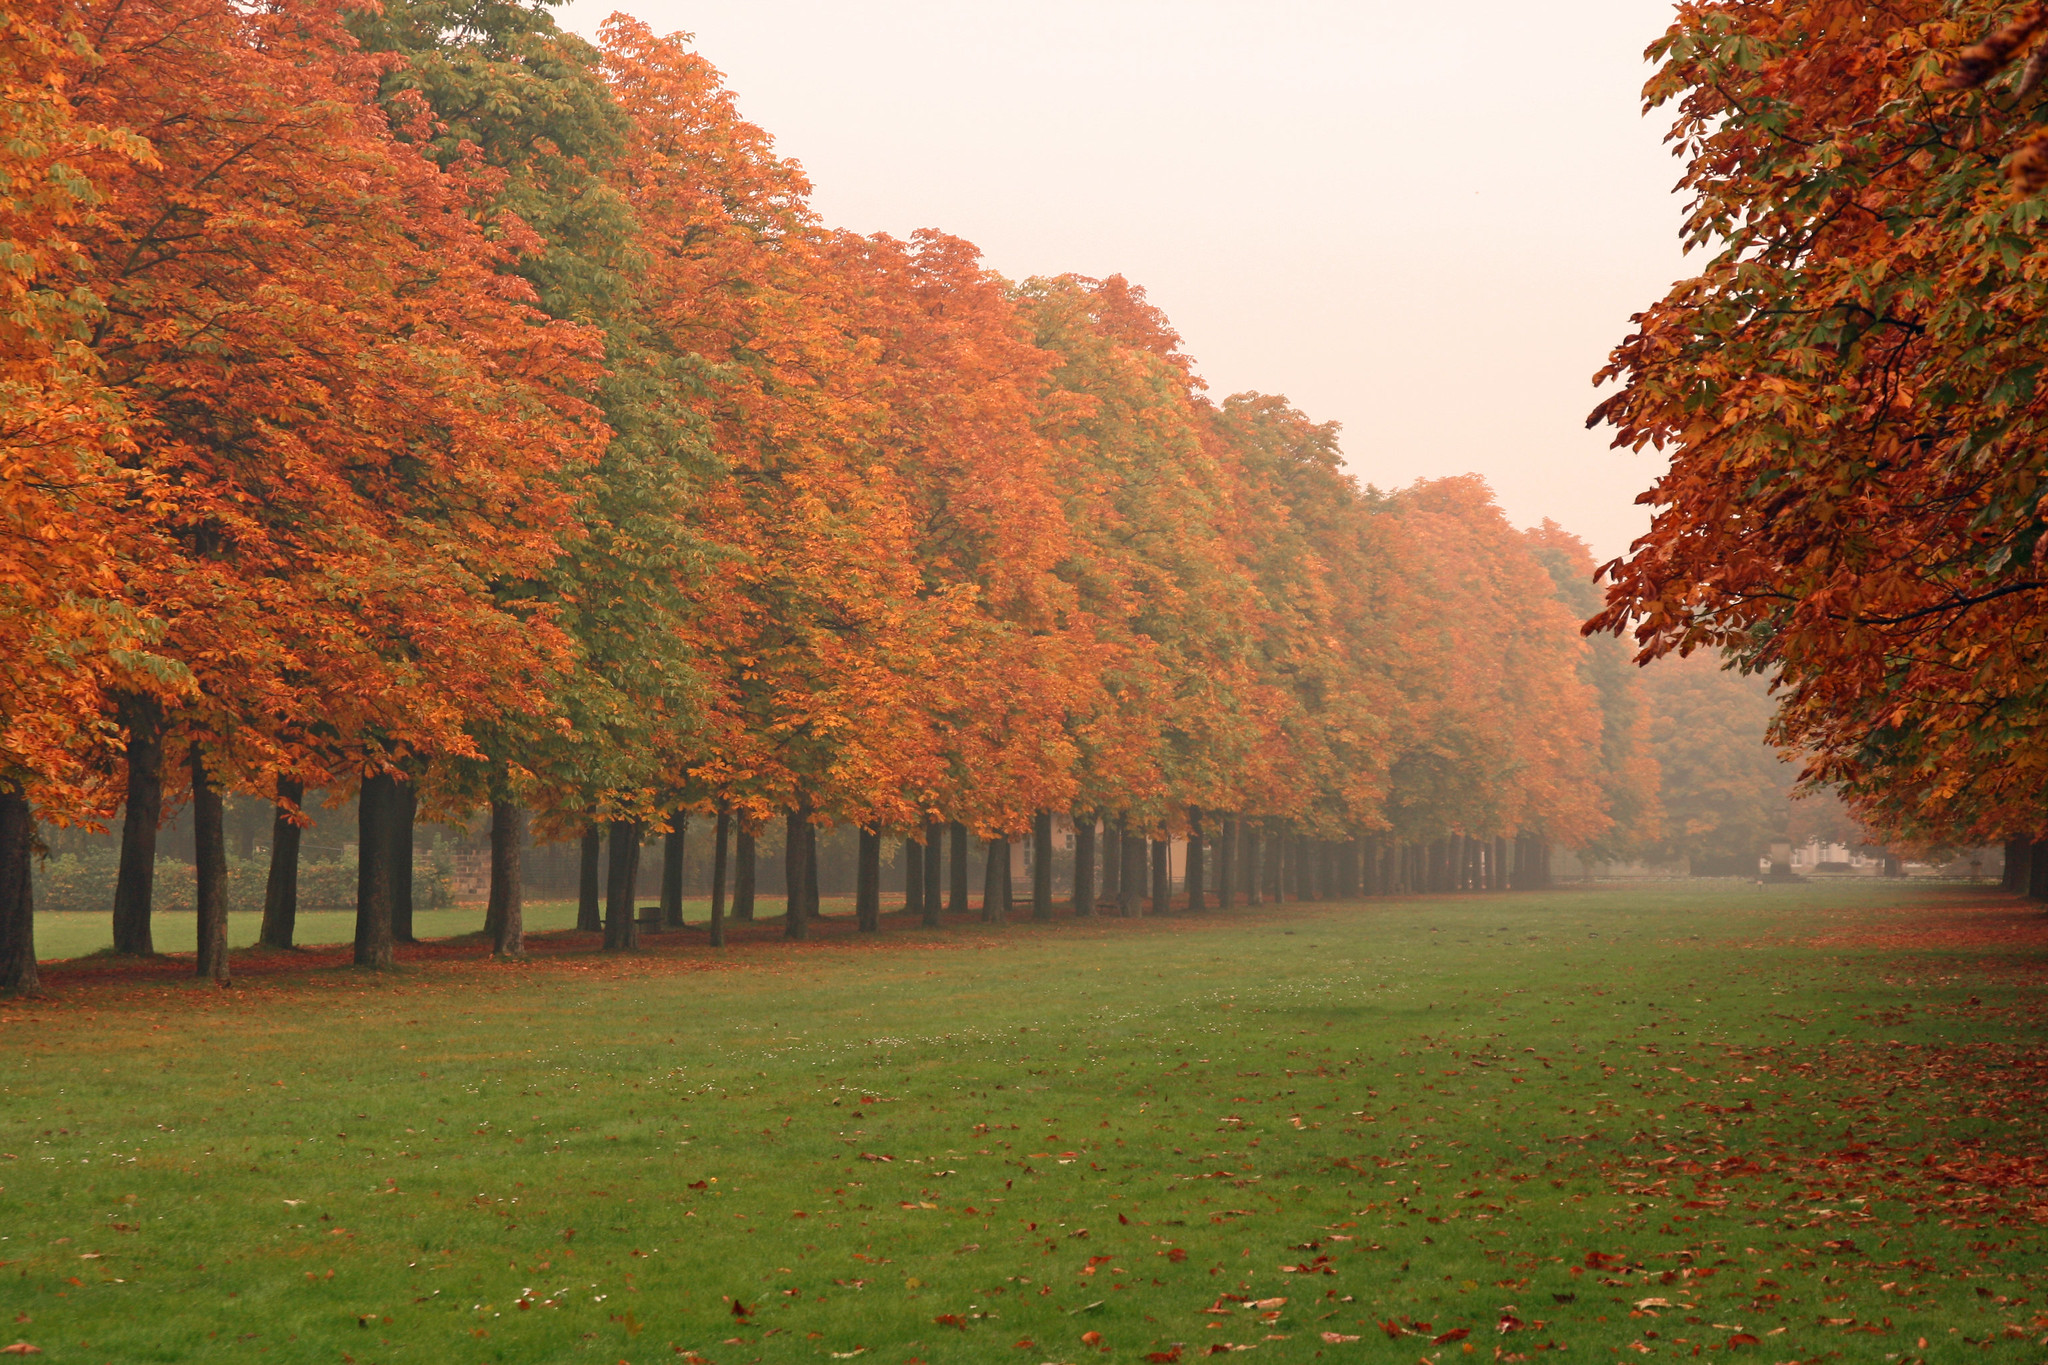 Trees with autumn leaves in a park. The leaves are turning from green to red and orange